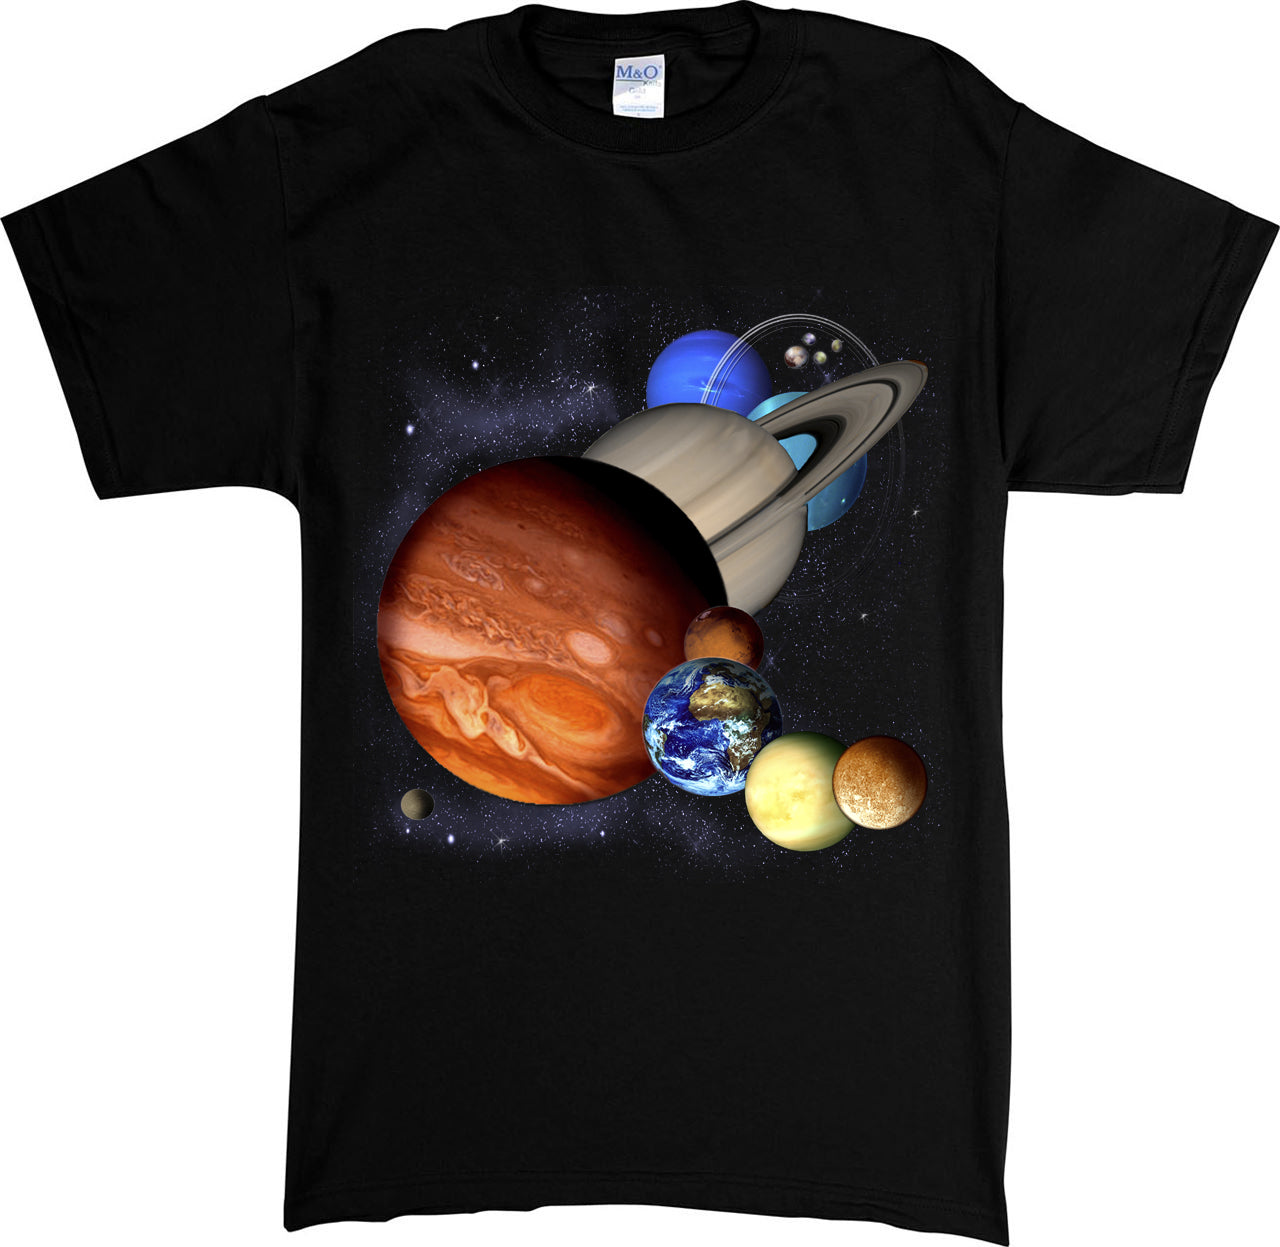 Planets T-shirt- black t-shirt with artwork of planets in our solar system